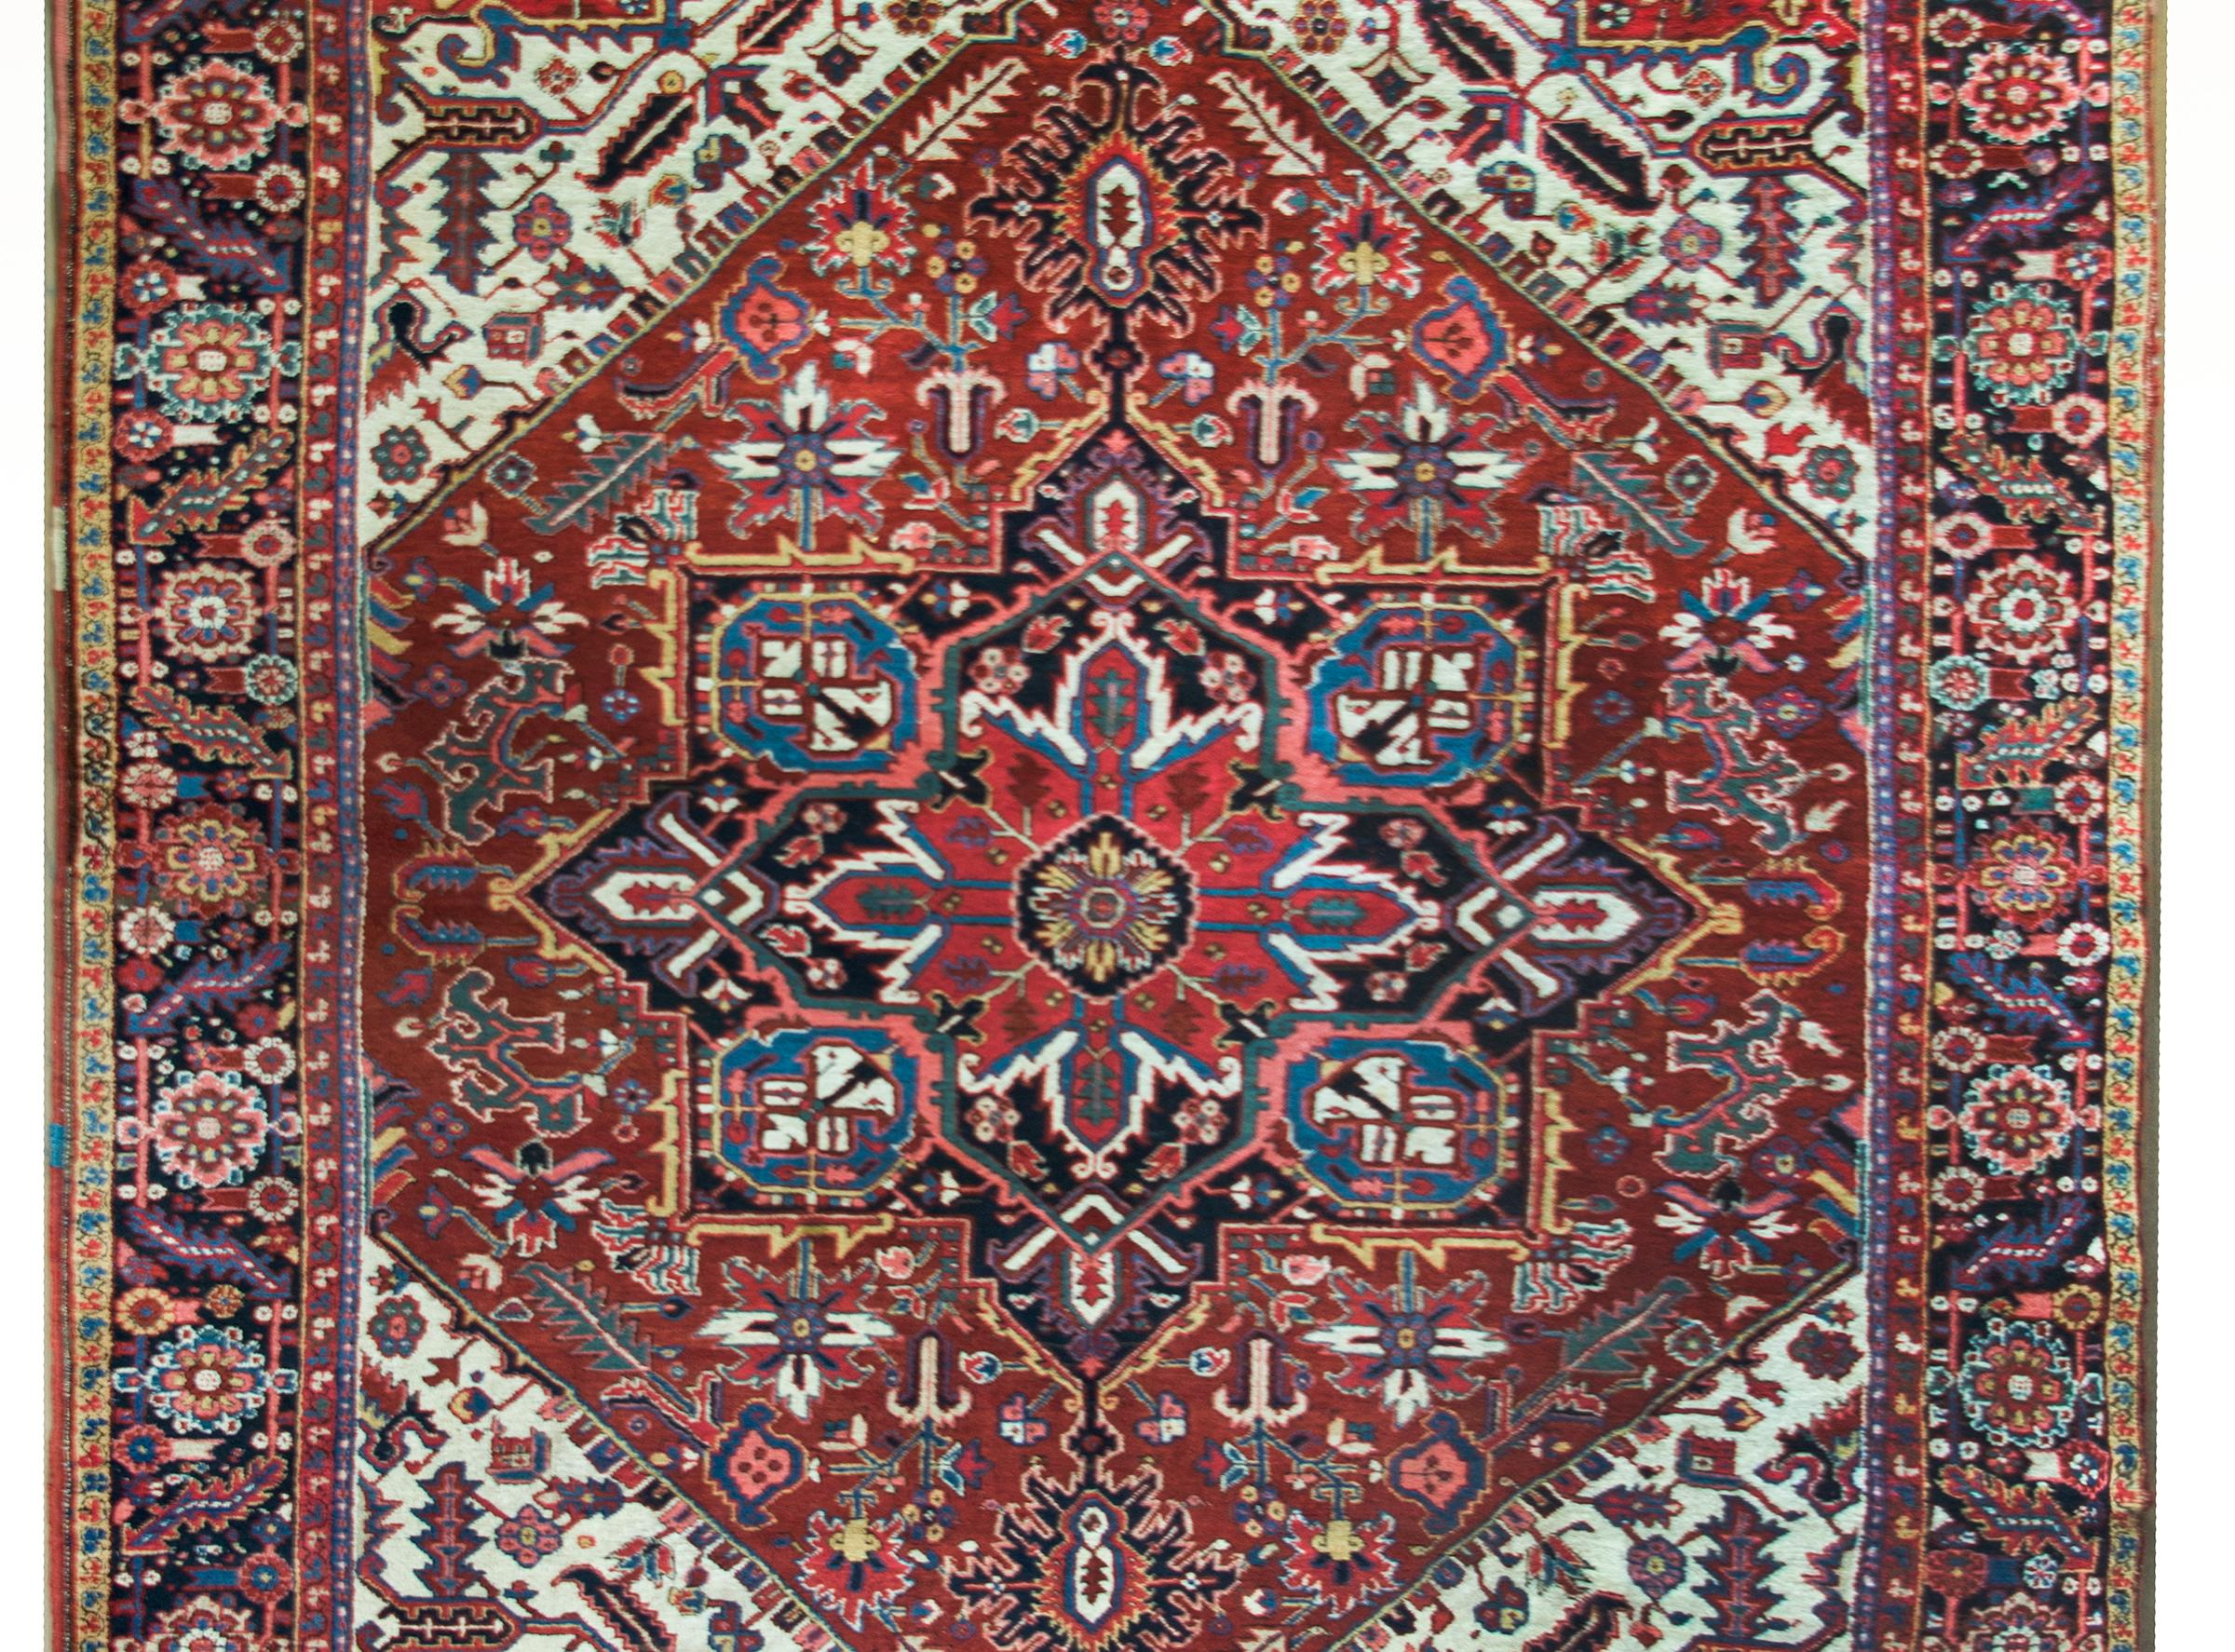 A stunning early 20th century Persian Heriz rug with a large central floral medallion amidst a field of more flowers and scrolling vines, surrounded by a complex border with a large-scale repeated floral pattern flanked by mismatched pairs of petite